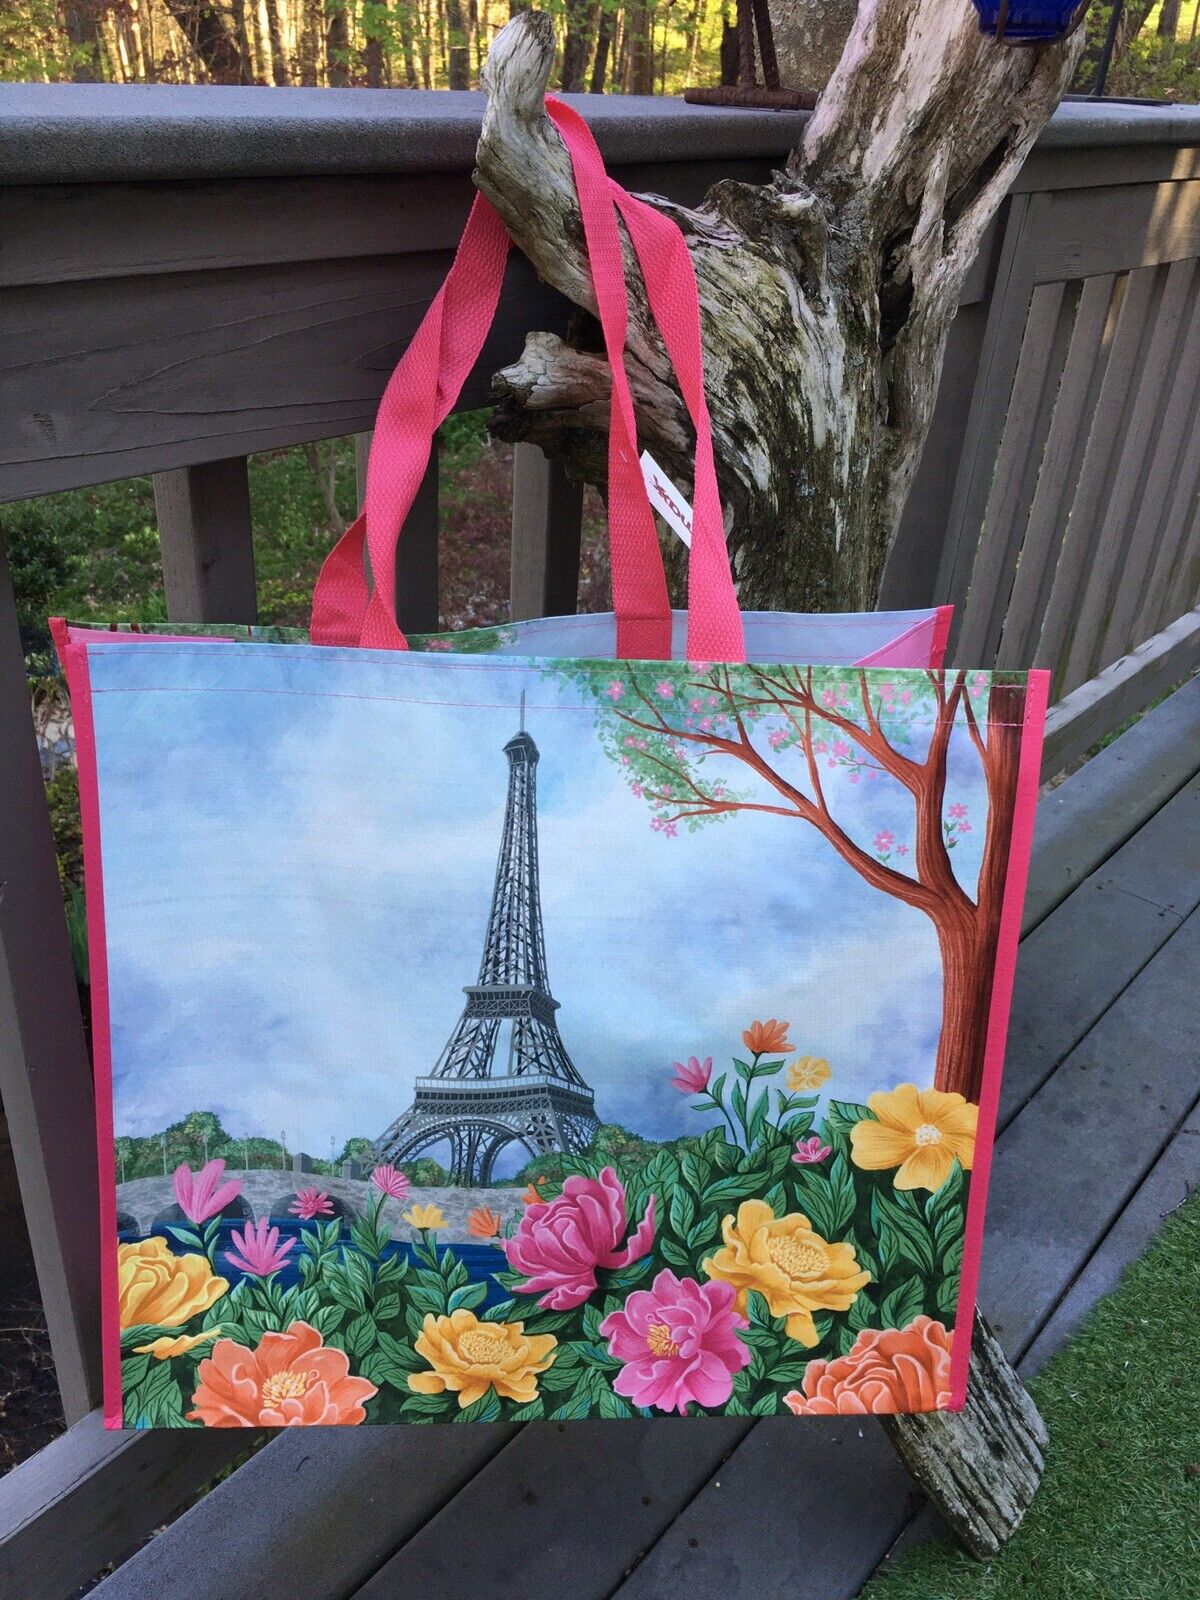 PARIS FRANCE Eiffel Tower in Spring Shopping Bag Gift Tote~Reusable TJ Maxx NEW